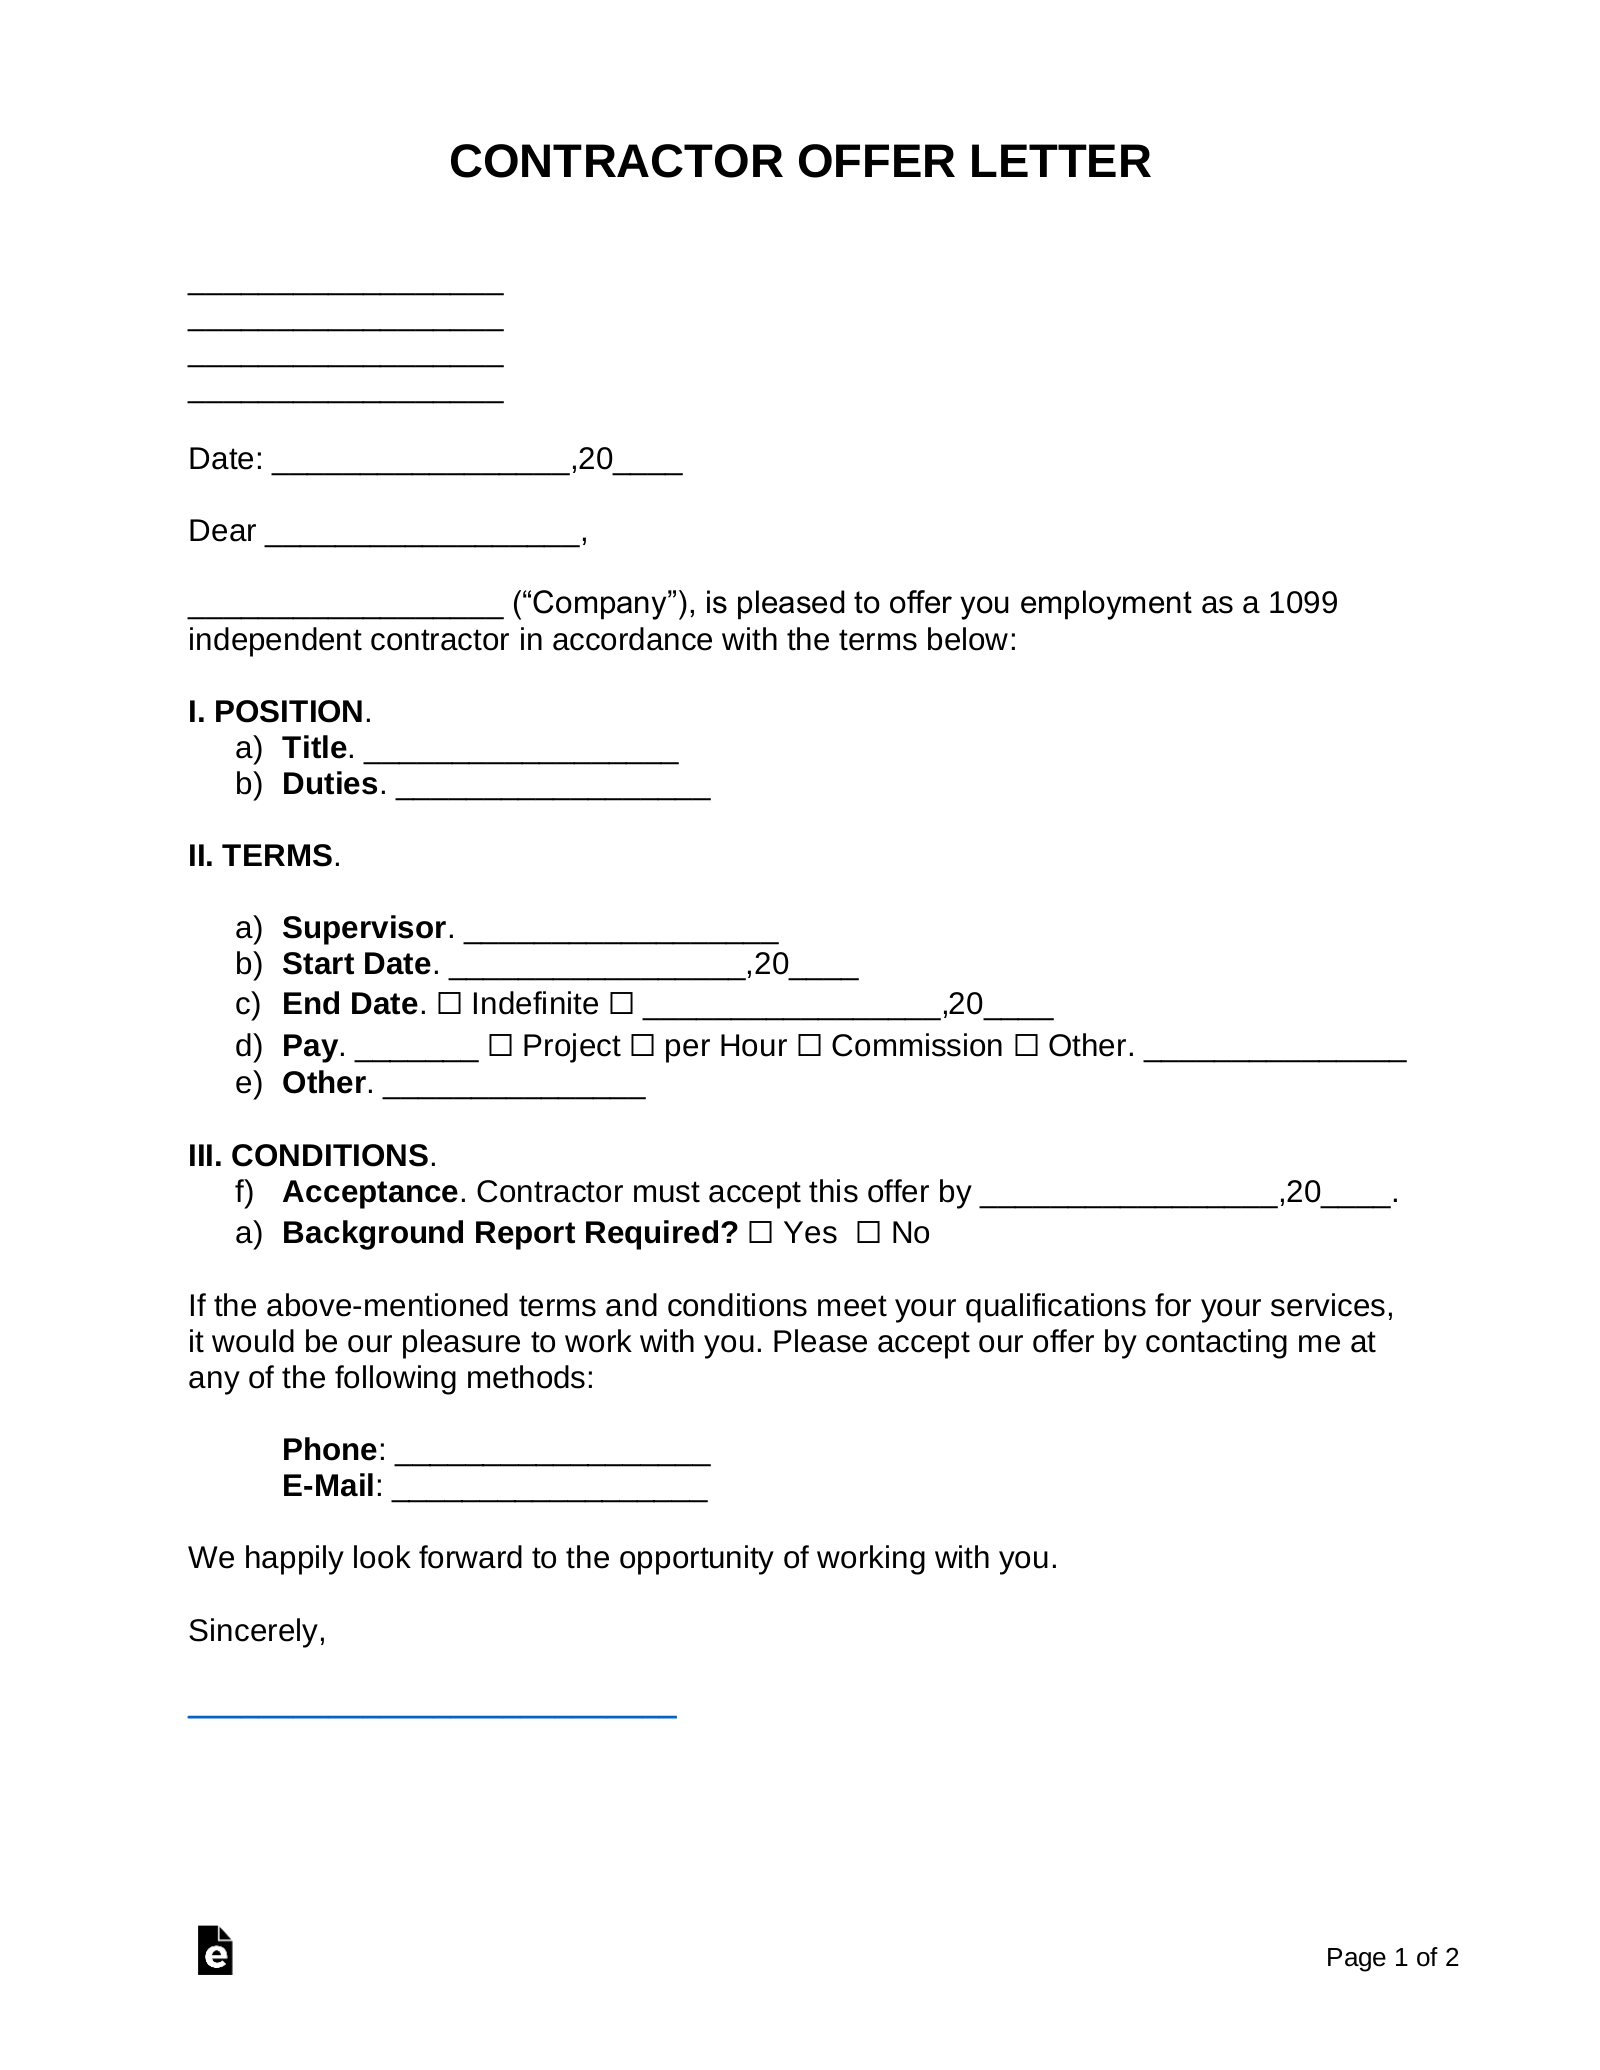 Free Independent Contractor (1099) Offer Letter Template Sample PDF